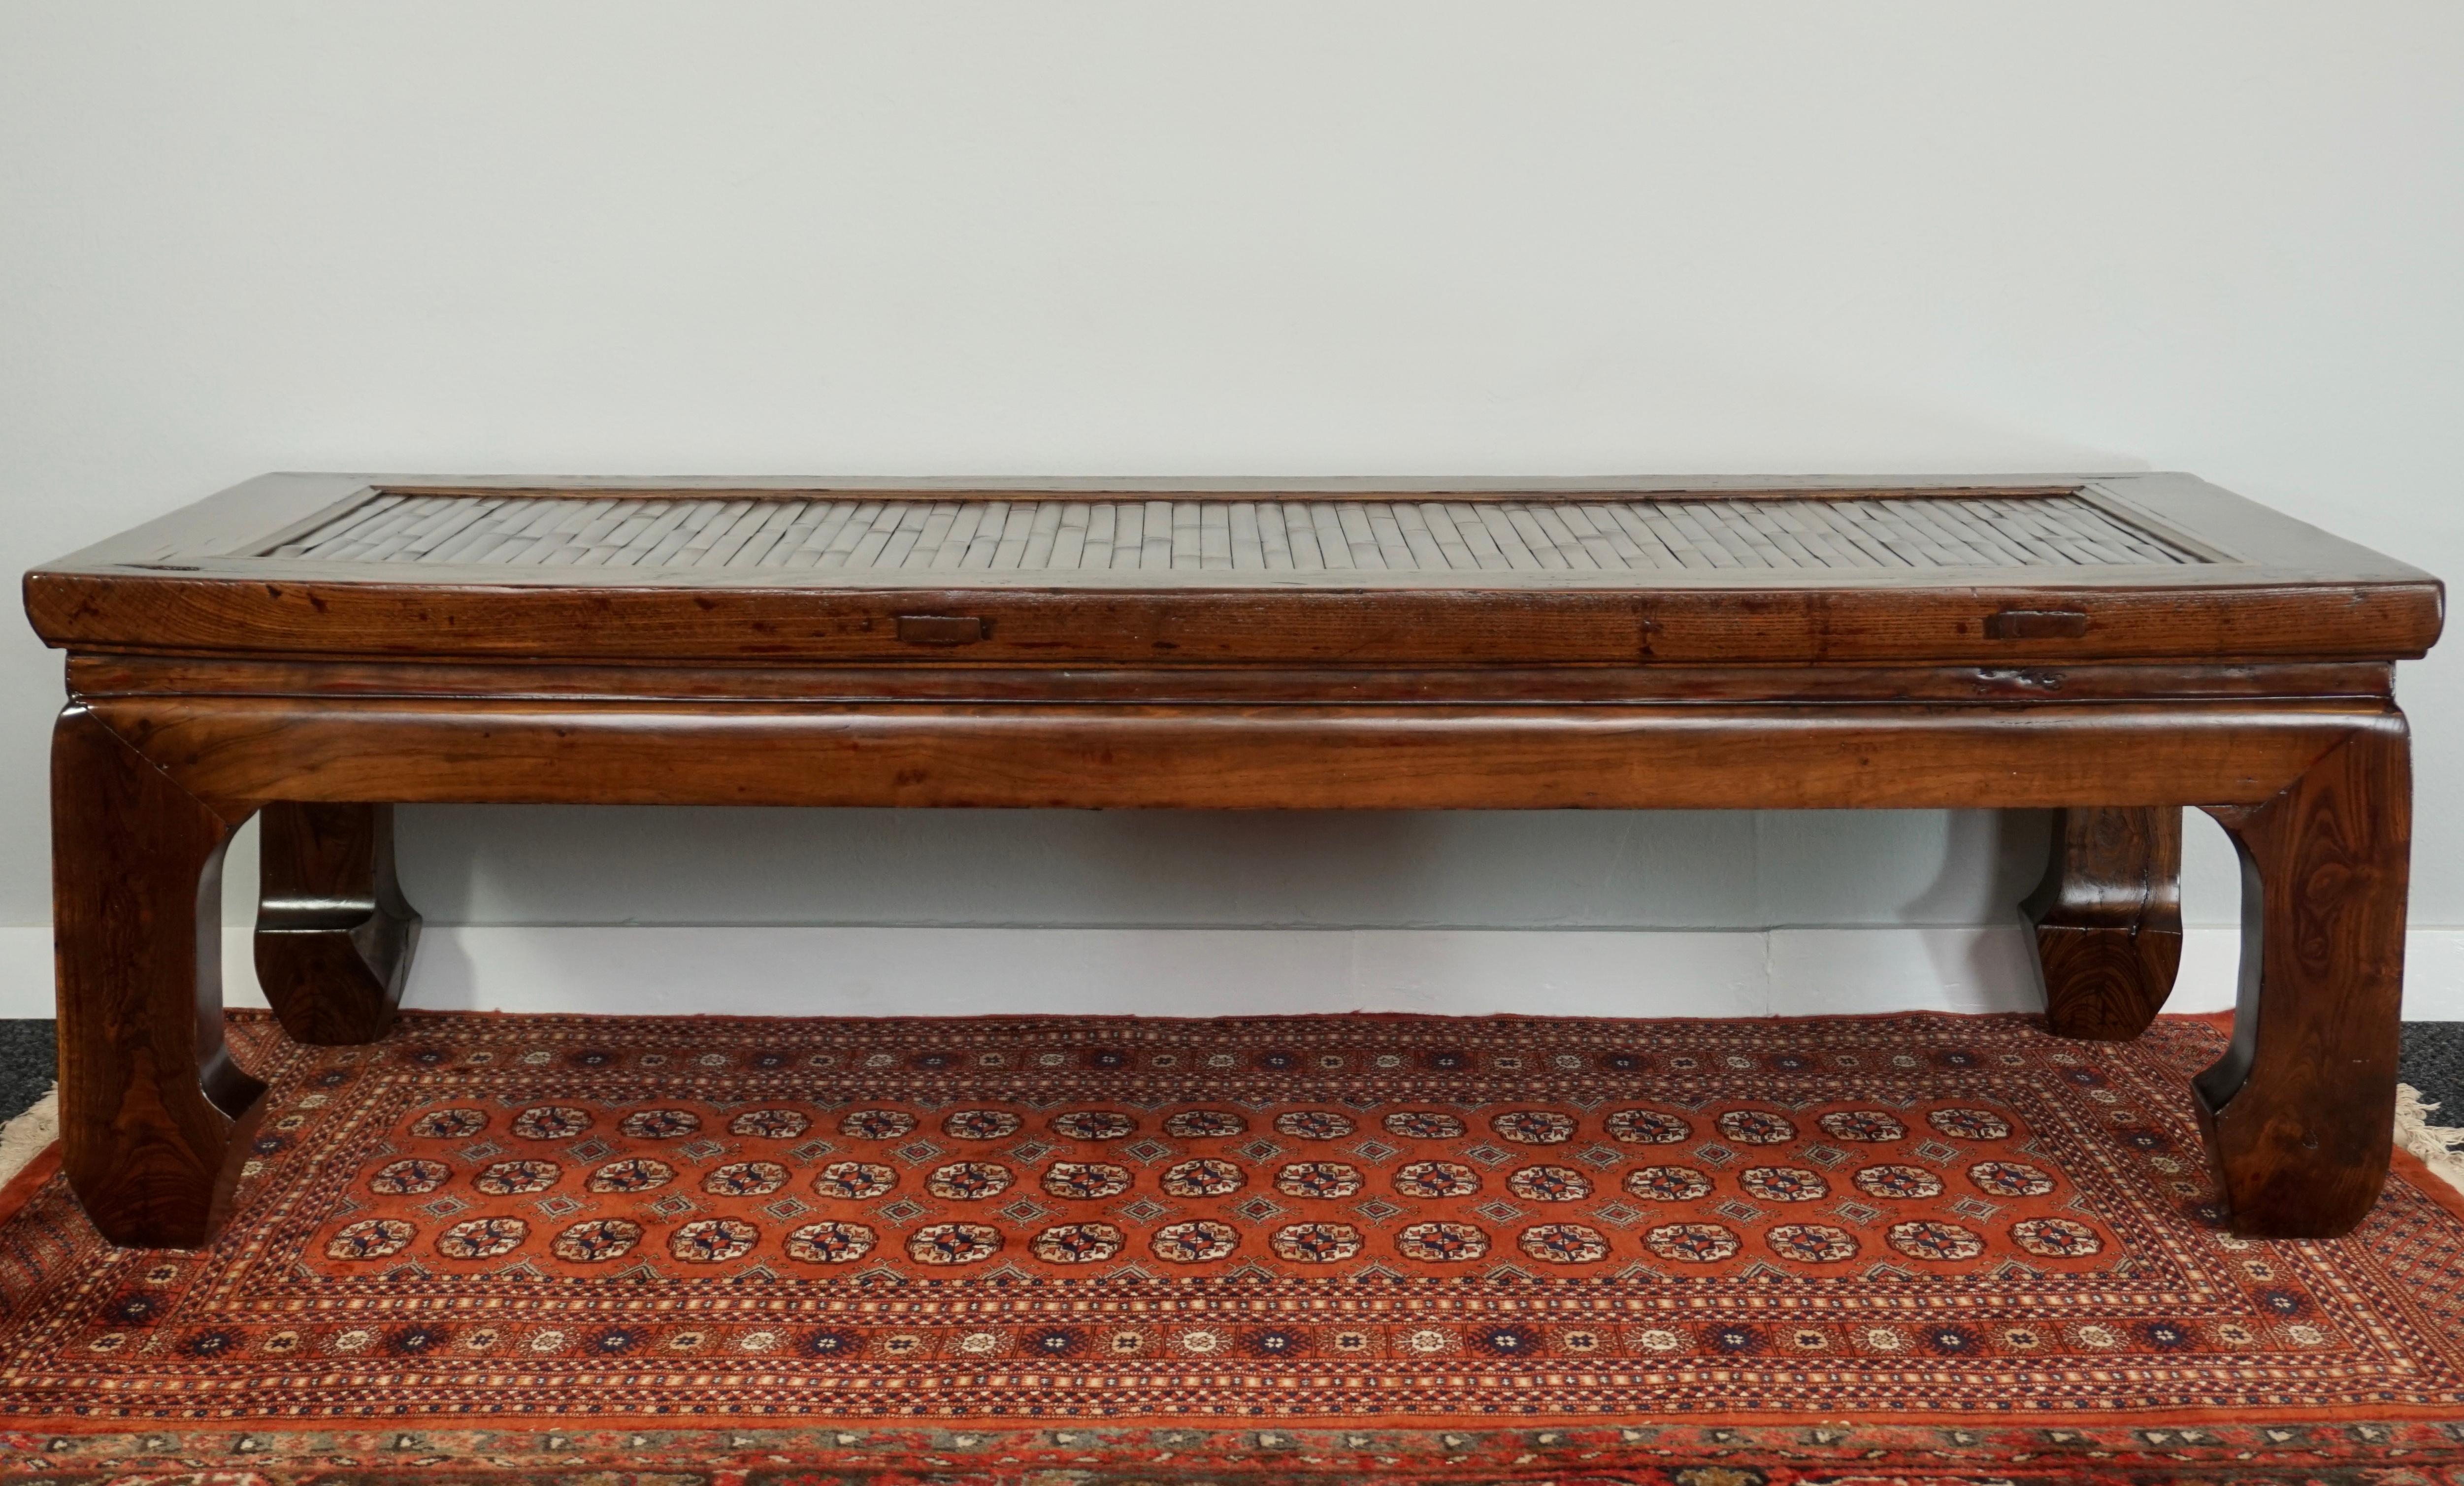 A wonderful and perfect size antique solid elmwood and bamboo opium bed that makes for the perfect coffee table. This is an actual bed and was used in China over a hundred years ago. It got the term “Opium Bed” because they were brought to the US in